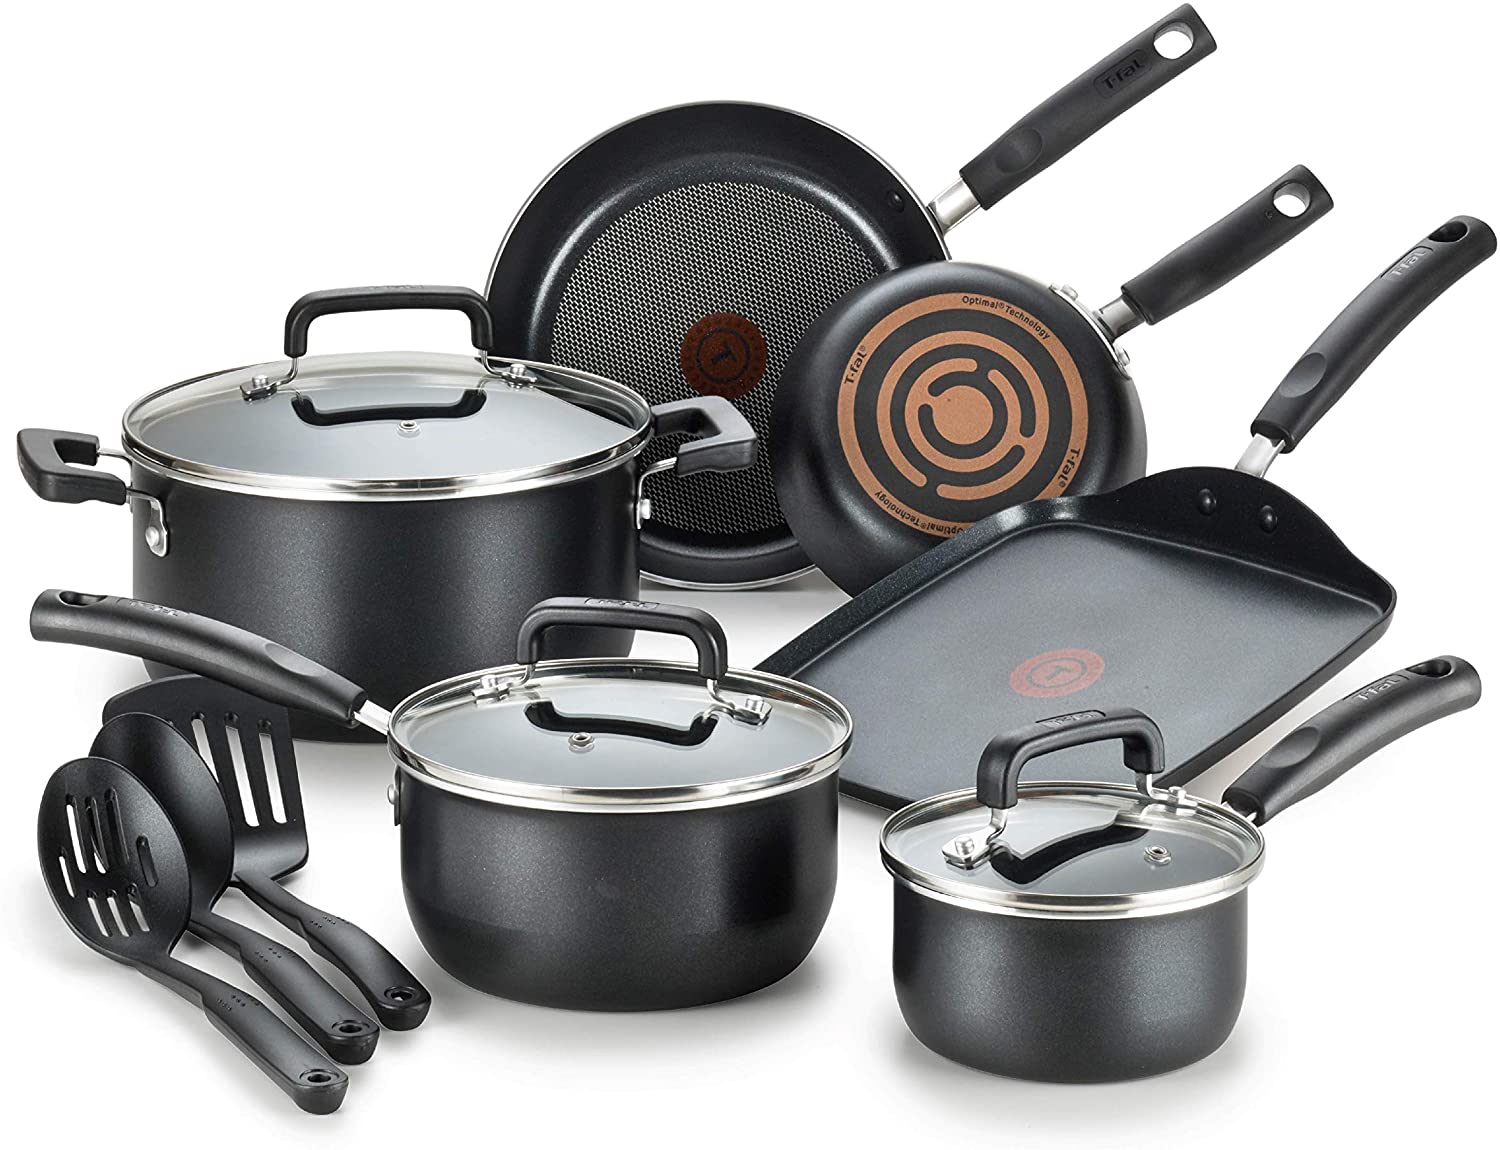 T-fal Ultimate Hard Anodized Nonstick Cookware Set 17 Piece Pots and Pans, Dishwasher  Safe Black